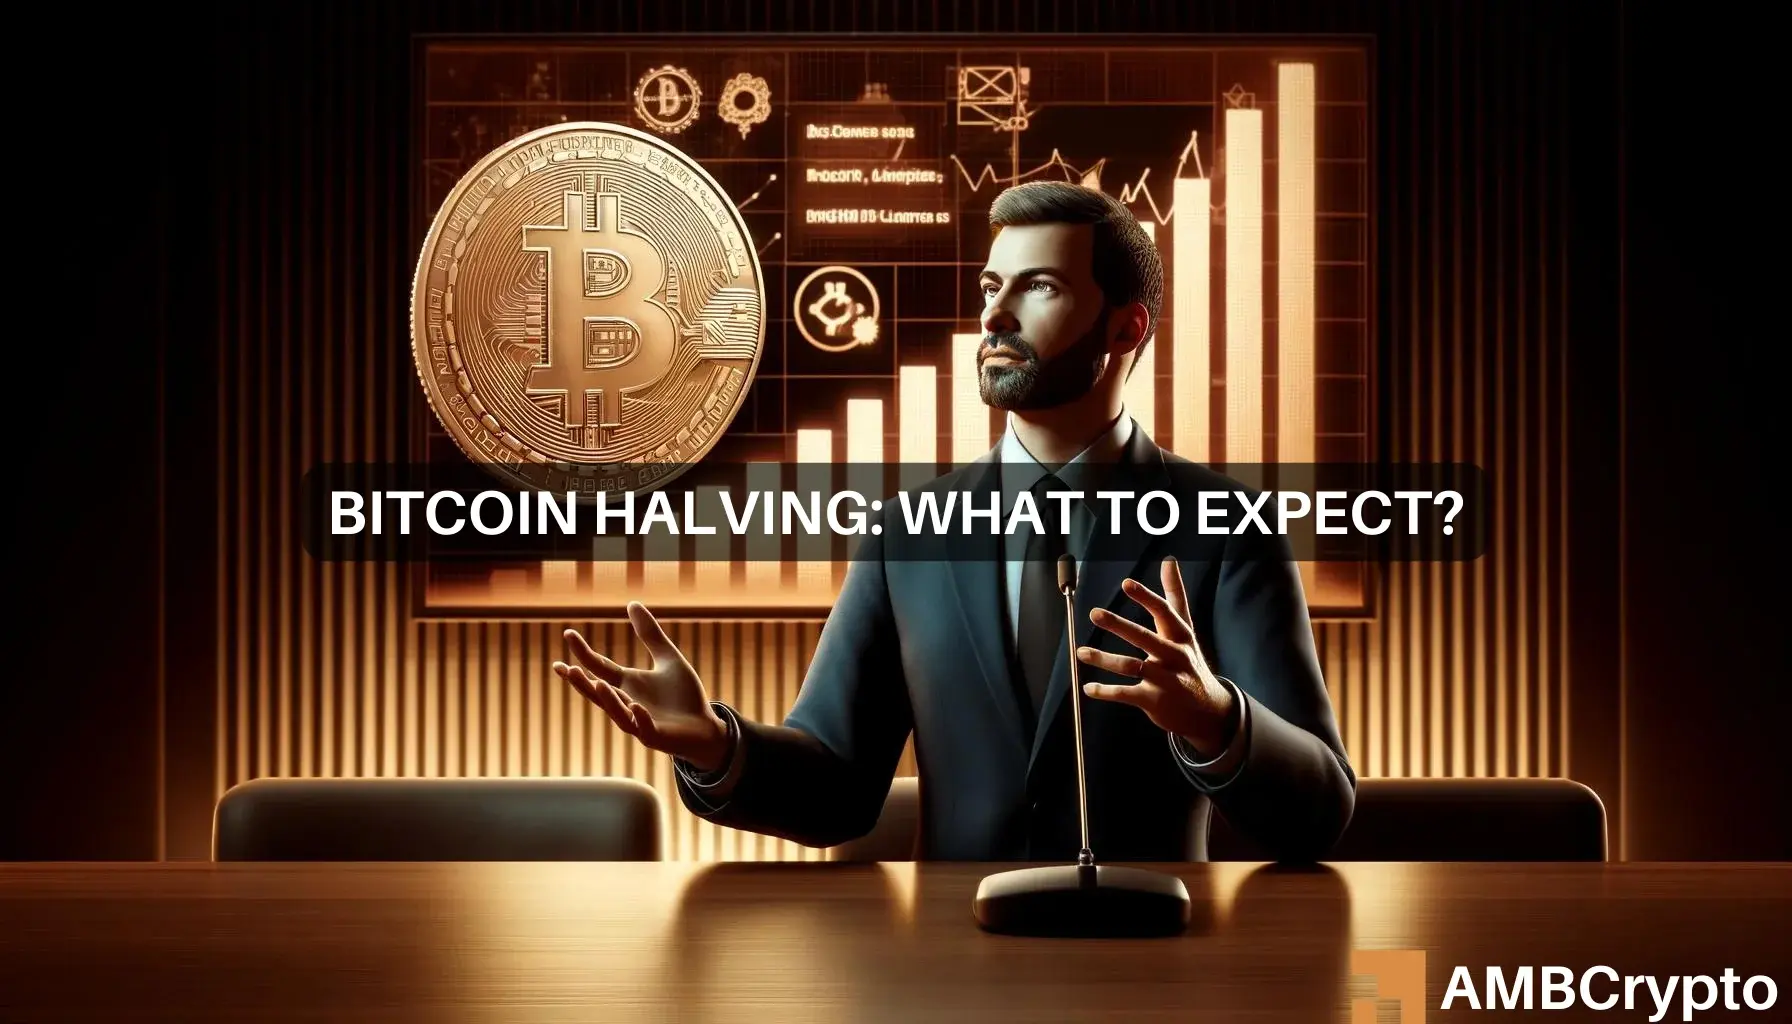 Post-halving Bitcoin prices: 'Ignore the noise,' exec advises, because...